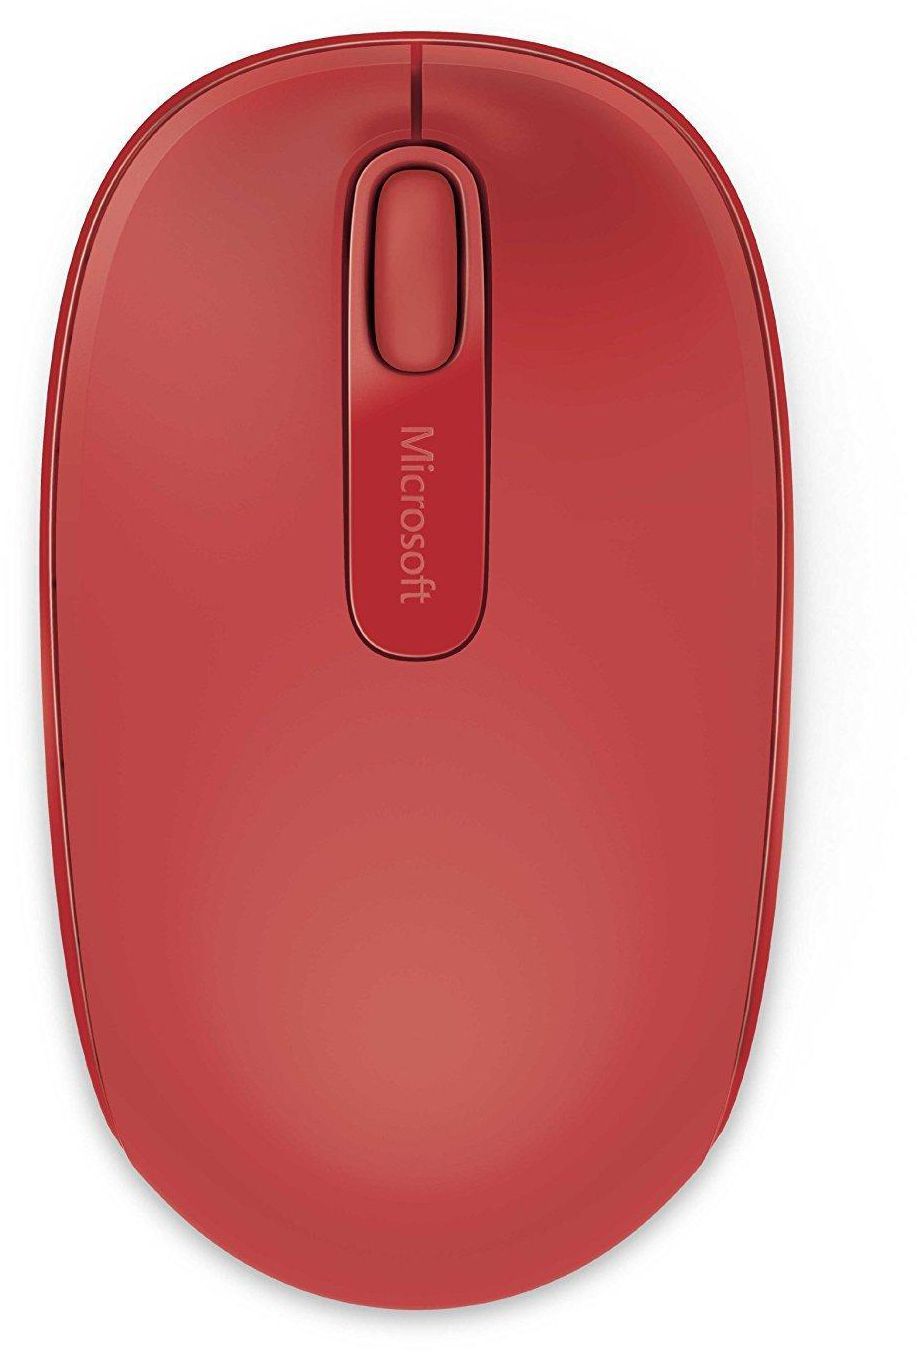 MICROSOFT WirelesMicrosoft Wireless Mbl Mouse 1850 Flame, Reds Mbl Mouse 1850 Flame Red V2